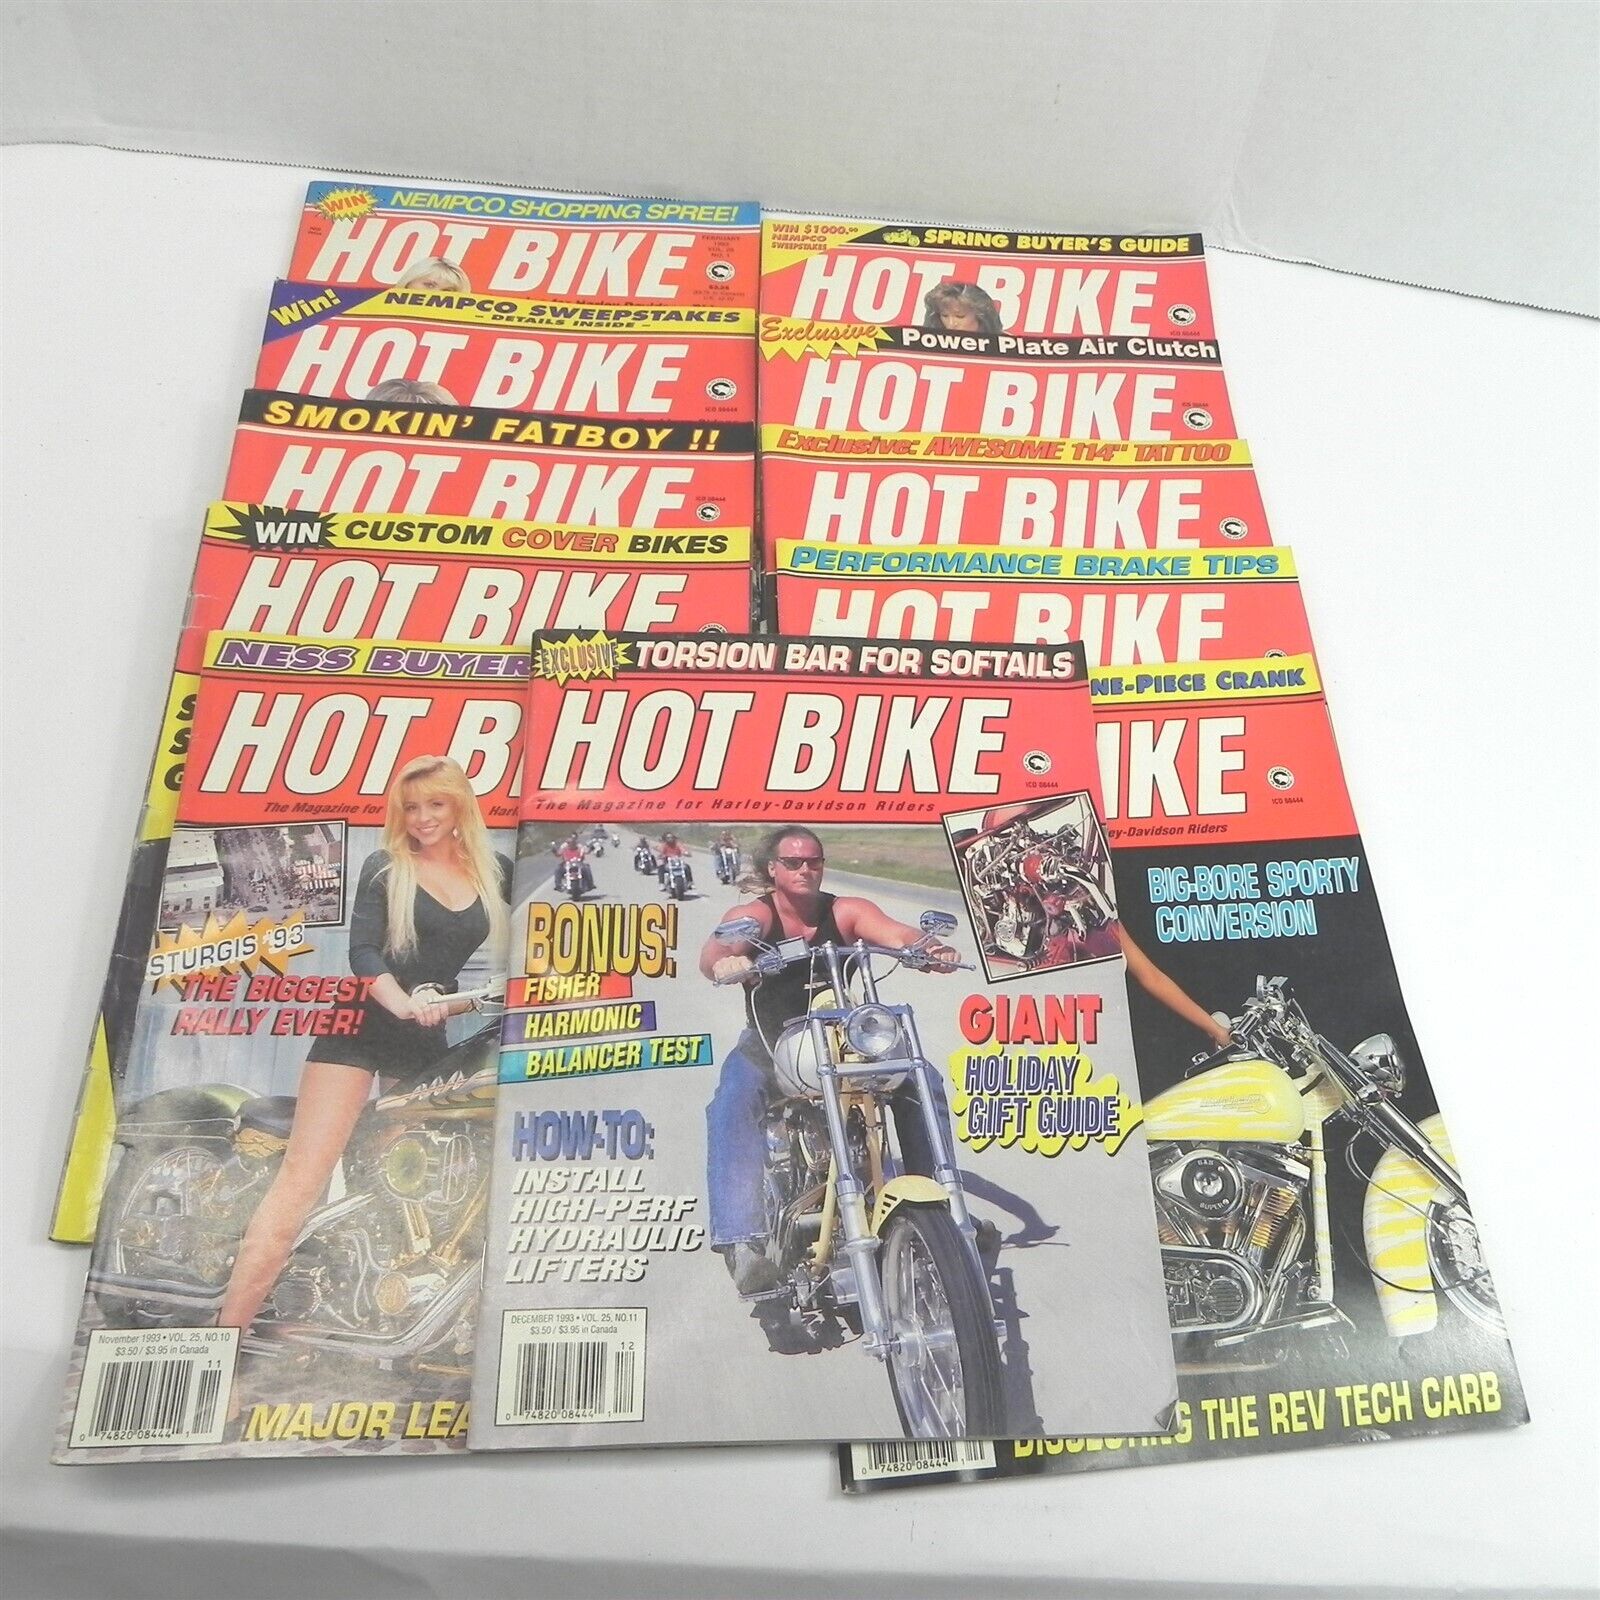 VINTAGE 1993 HOT BIKE MOTORCYCLE MAGAZINE LOT OF 11 ISSUES HARLEYS CHOPPERS